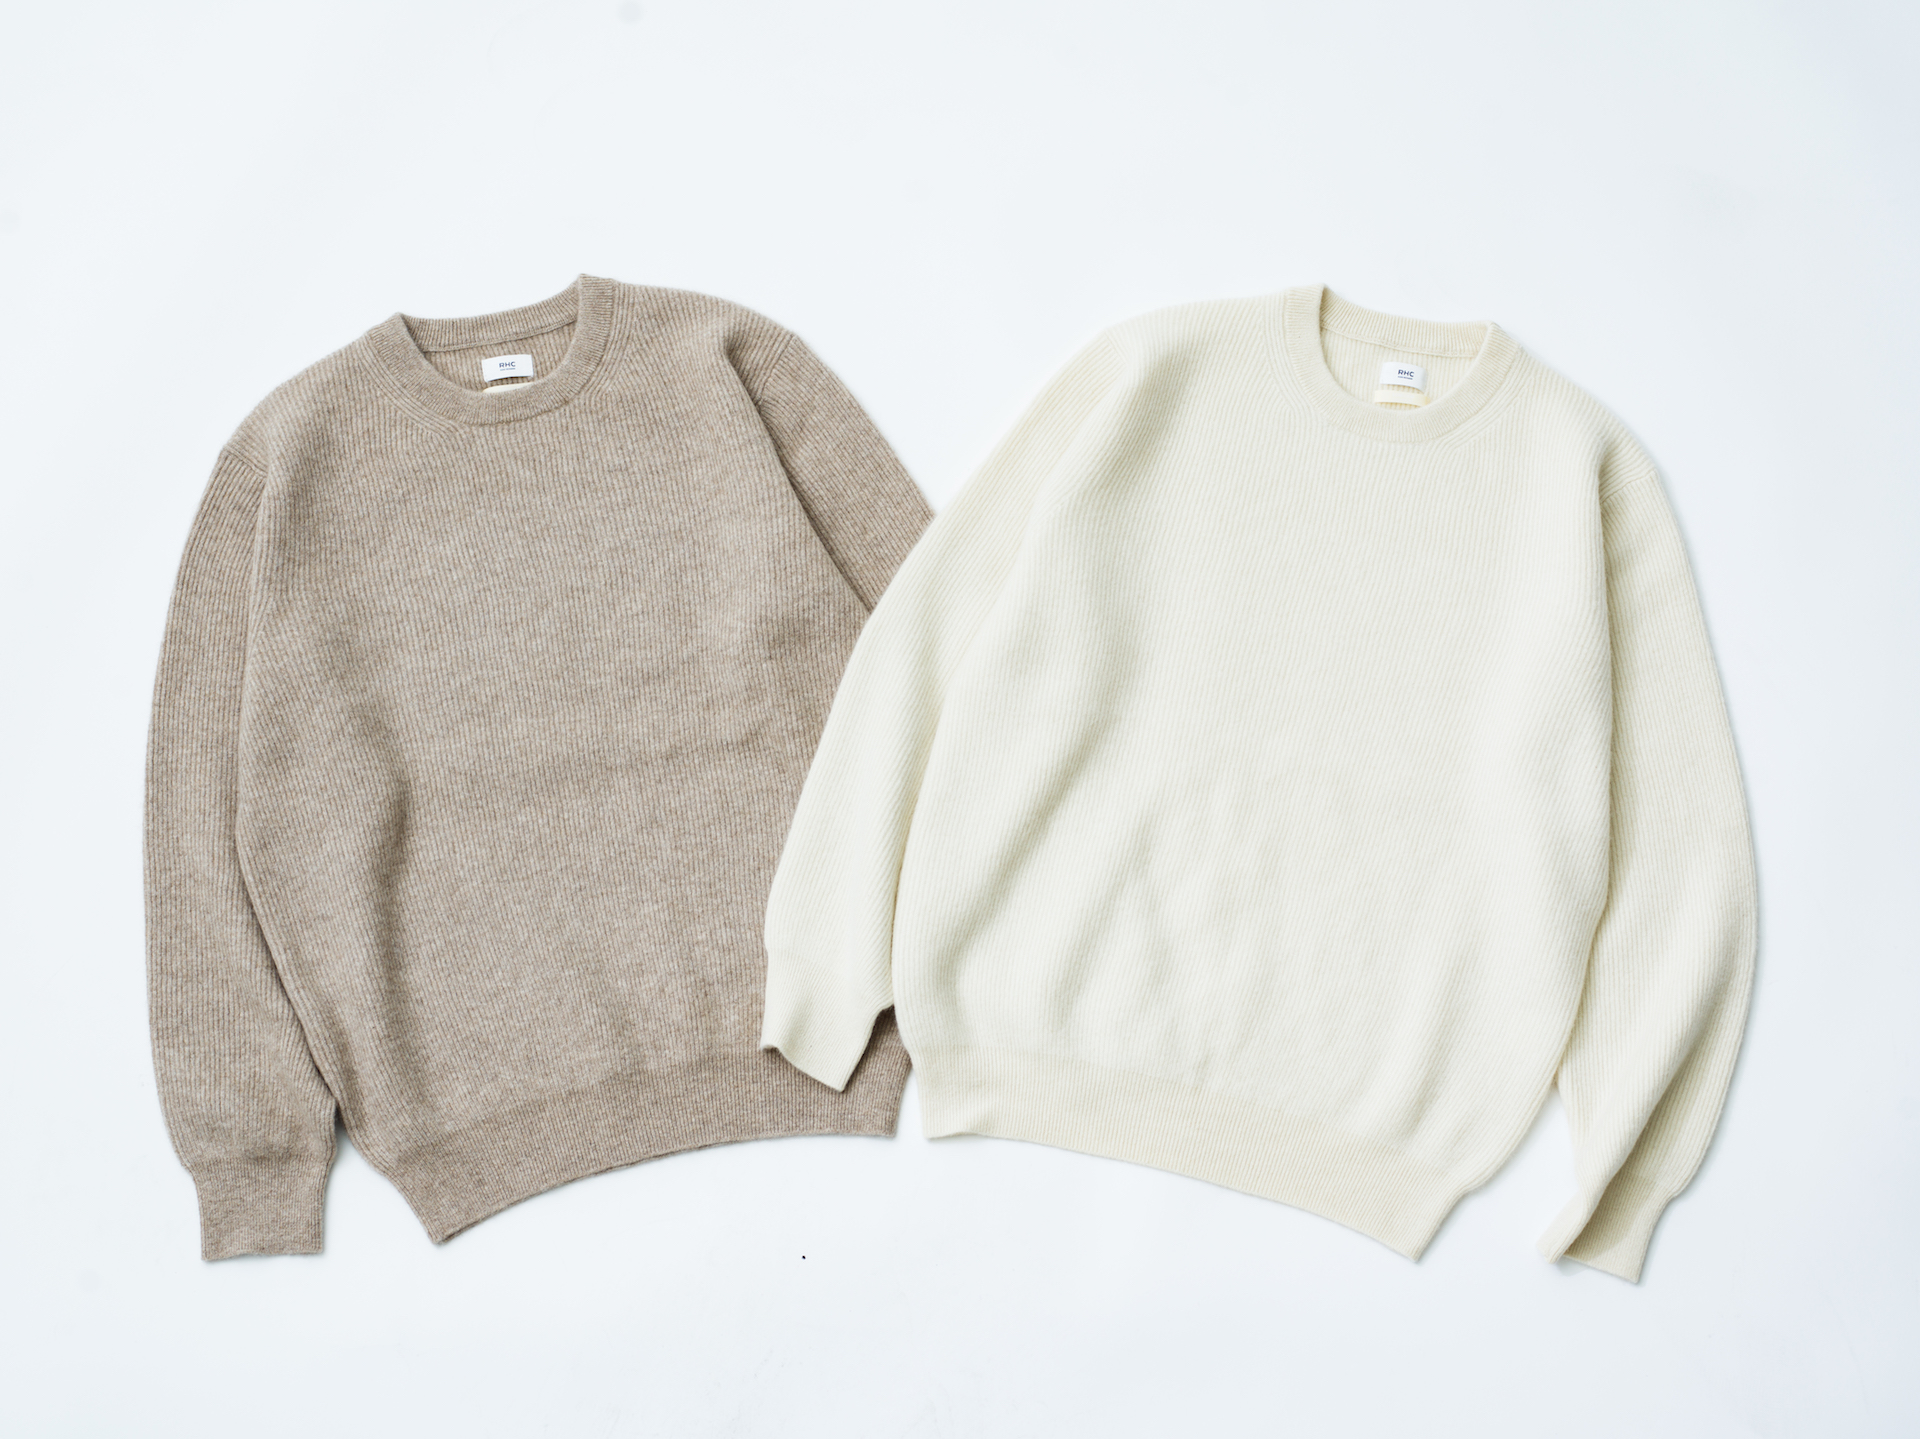 Undyed Cashmere
Cardigan&Pullover